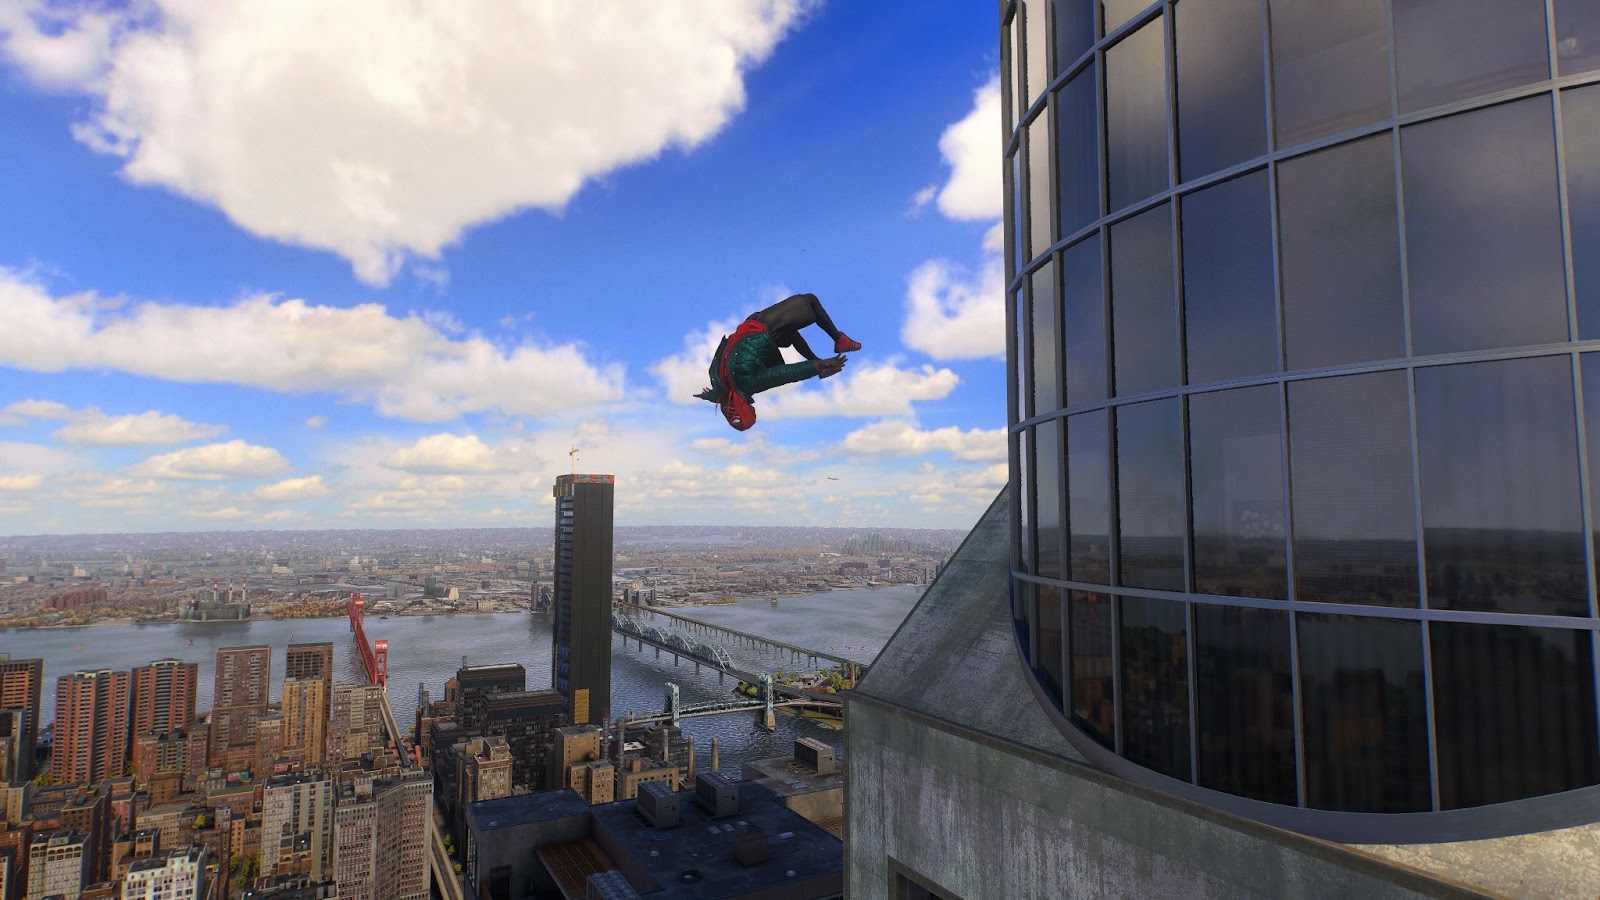 An in game screenshot of Miles Morales in the Sportswear suit from Marvel's Spider-Man 2